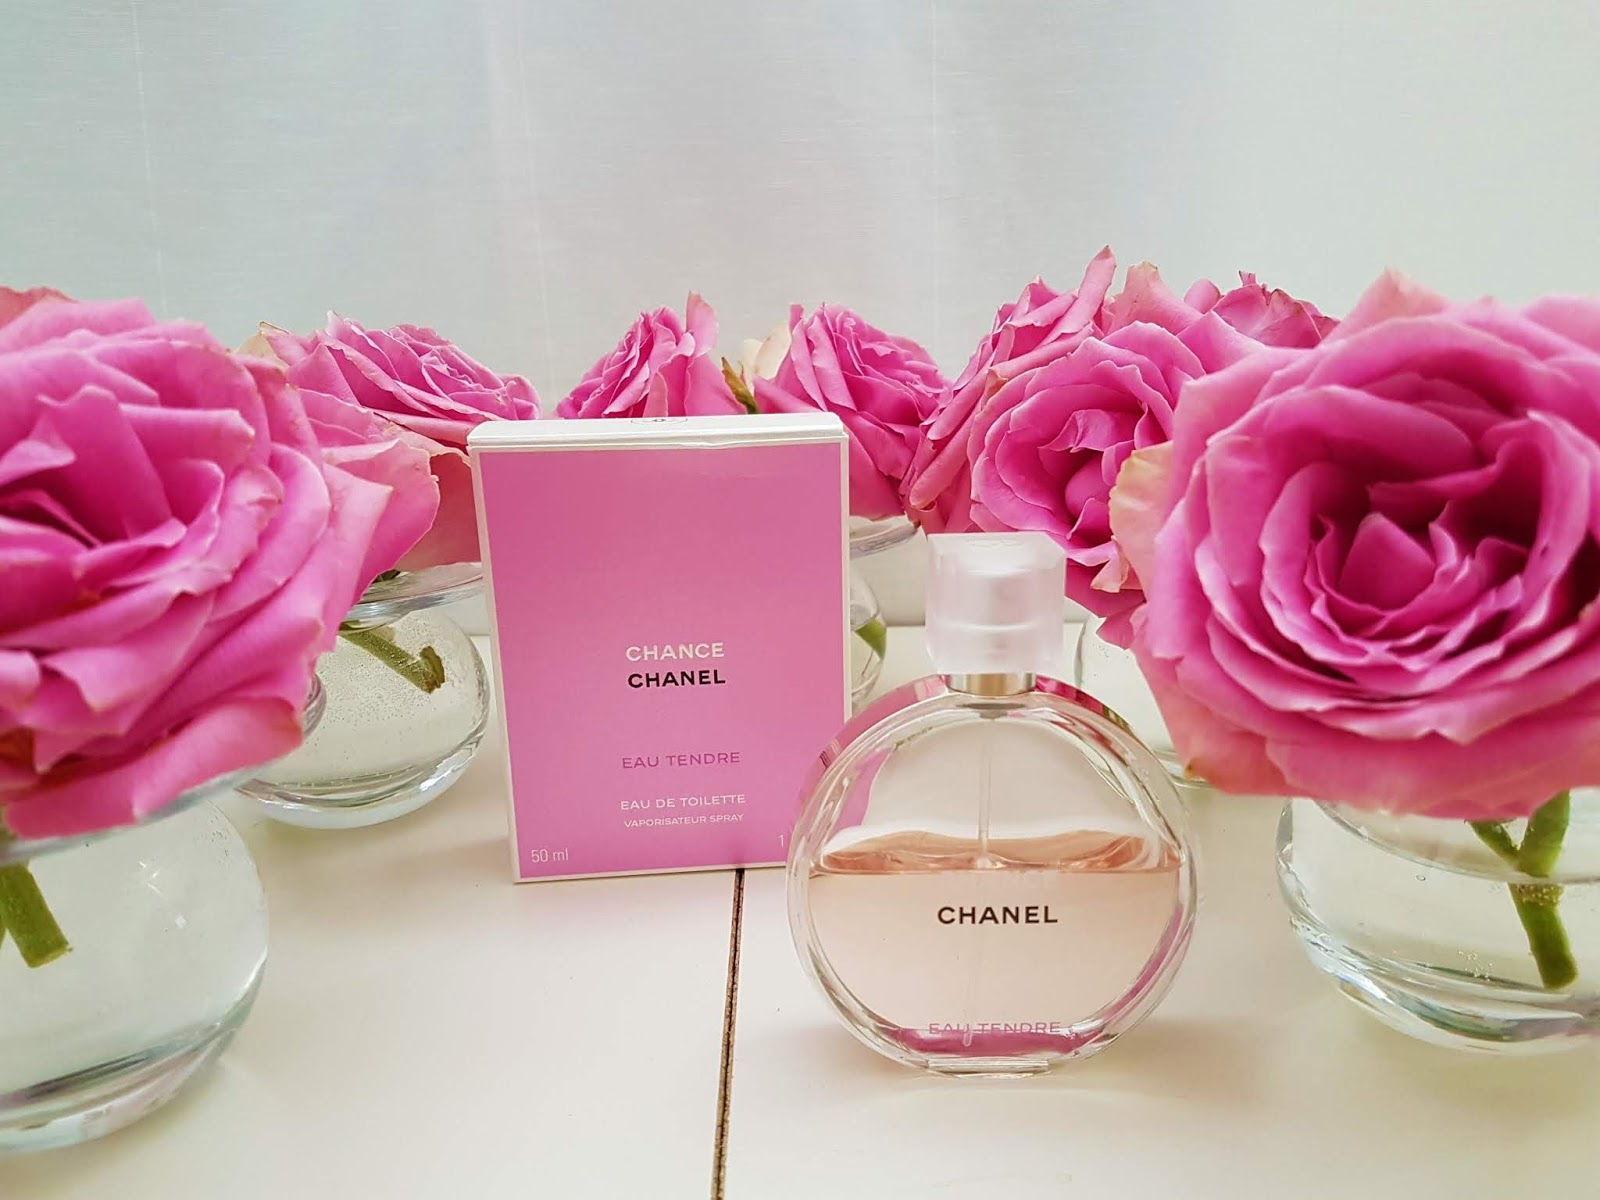 CHANEL CHANCE EAU TENDRE - THE EXCLUSIVE BEAUTY DIARY